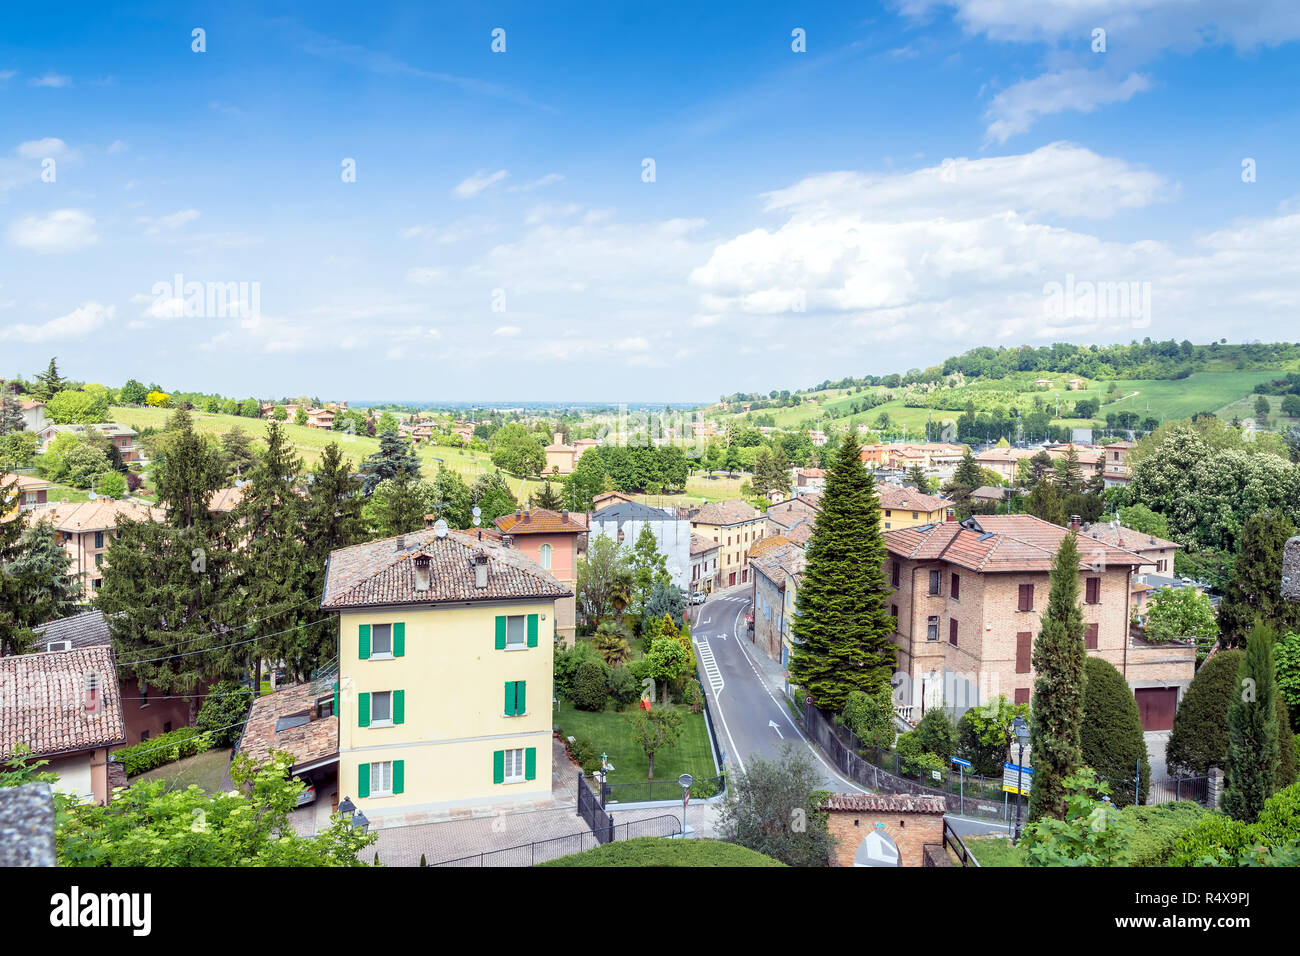 Castelvetro, Italy  - April 25, 2017: panoramic view of town in Castelvetro, Italy. Castelvetro is known for its 6 medial towers and is a renowned cen Stock Photo